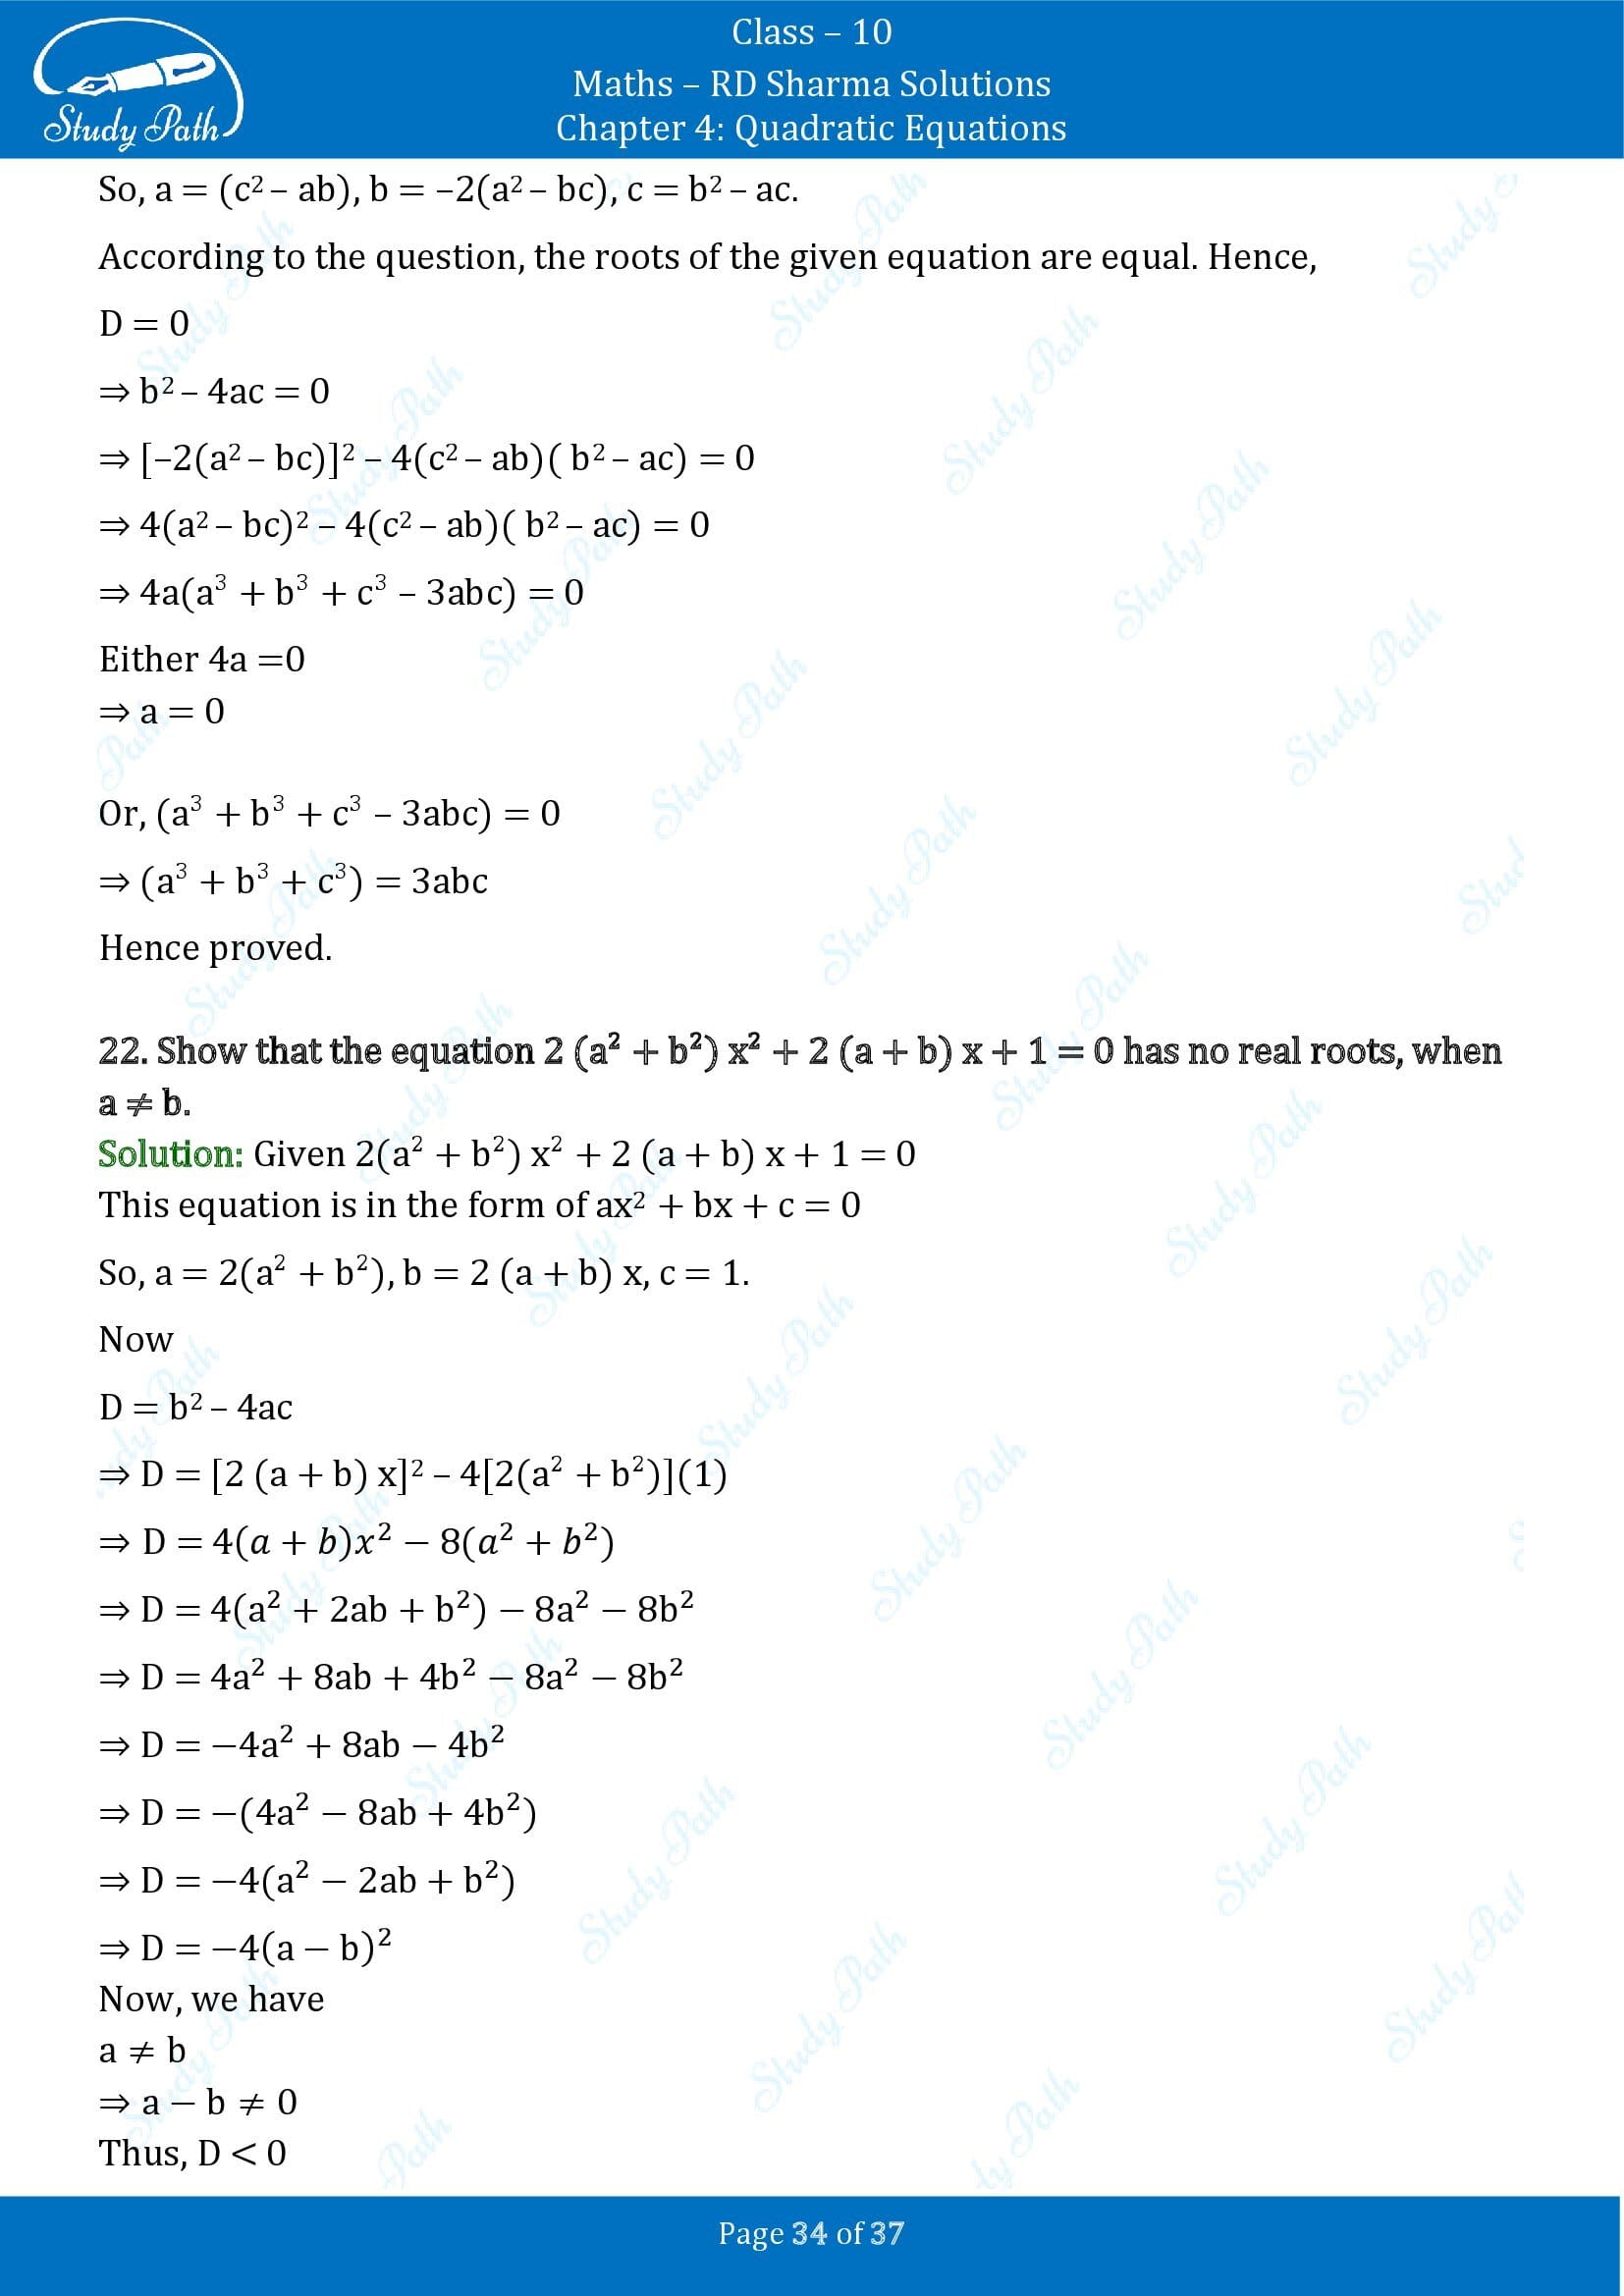 RD Sharma Solutions Class 10 Chapter 4 Quadratic Equations Exercise 4.6 00034